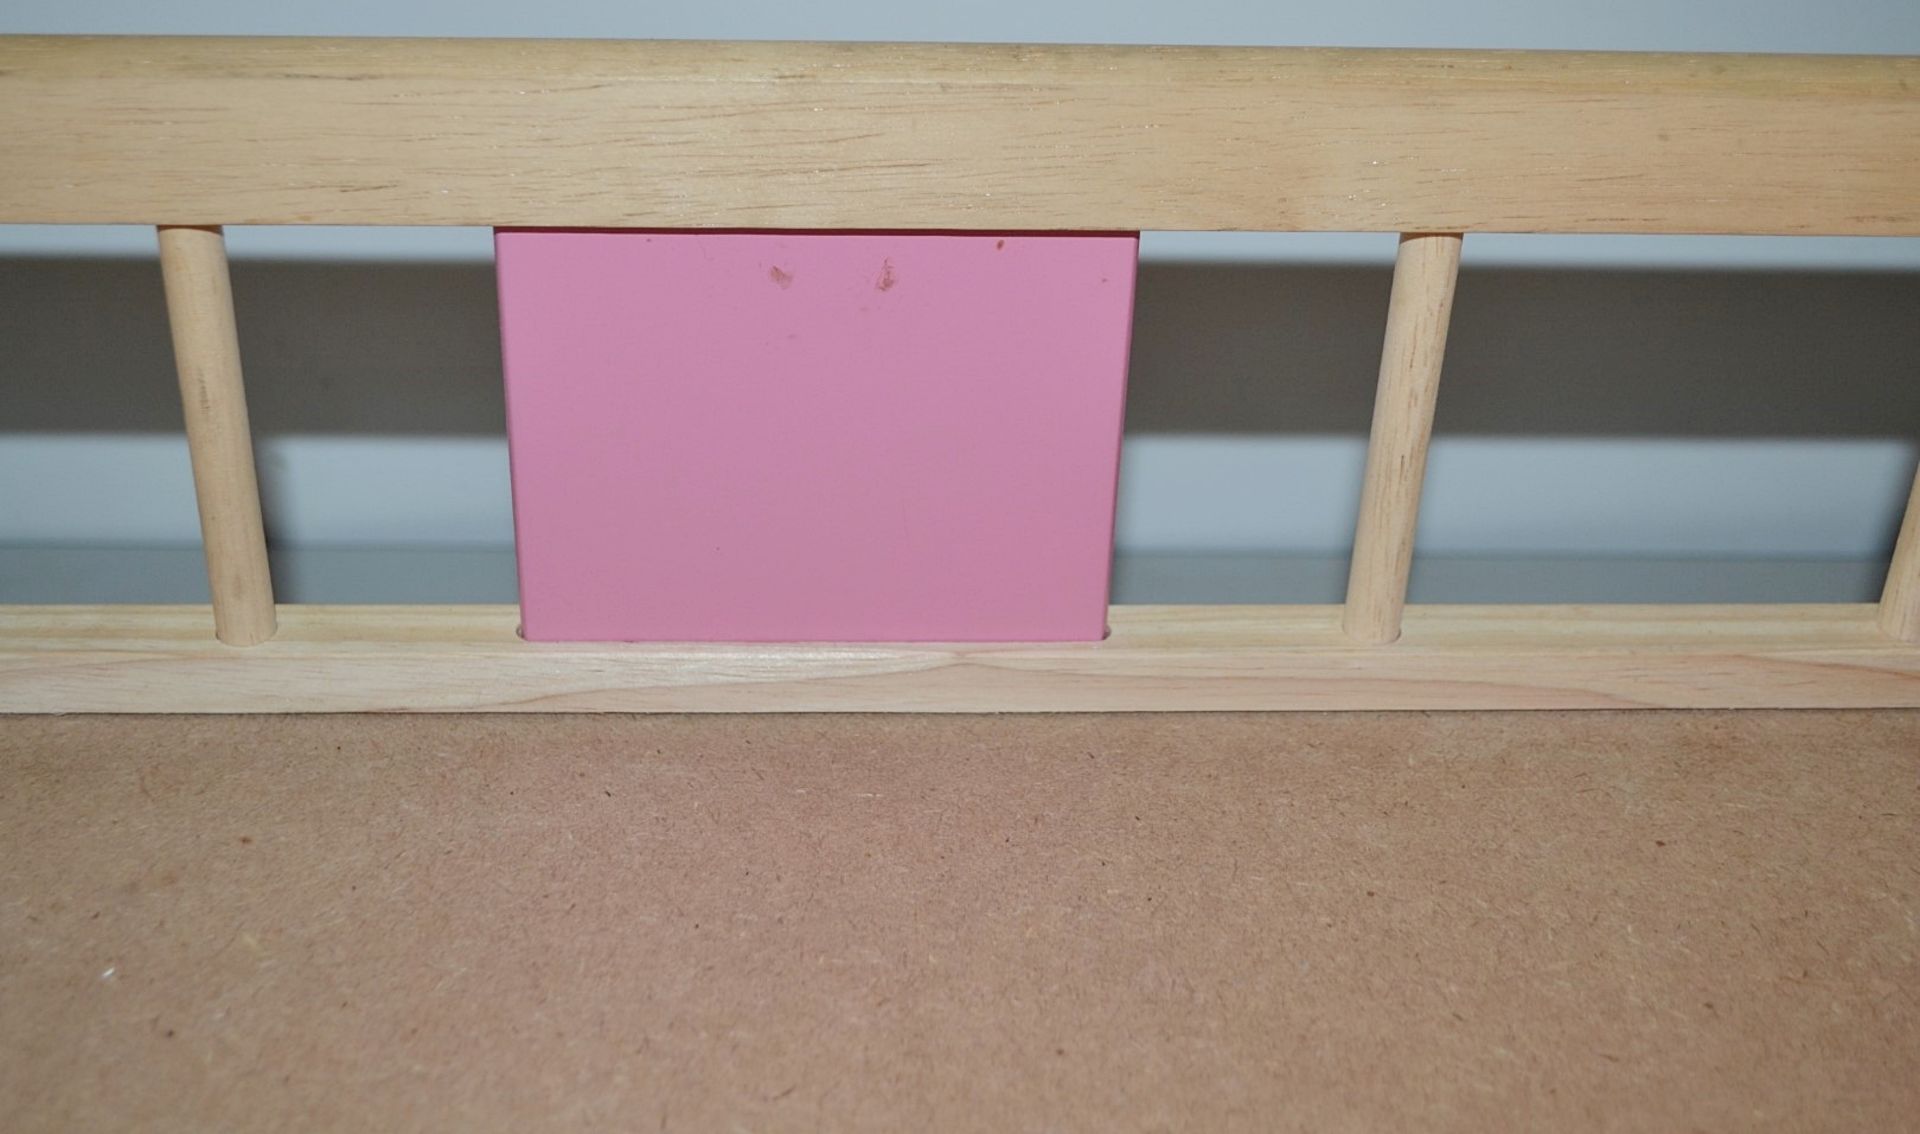 1 x Toy Wooden Doll Cot - Ref: CB129 - CL425 - Location: Altrincham WA14 - Image 4 of 4